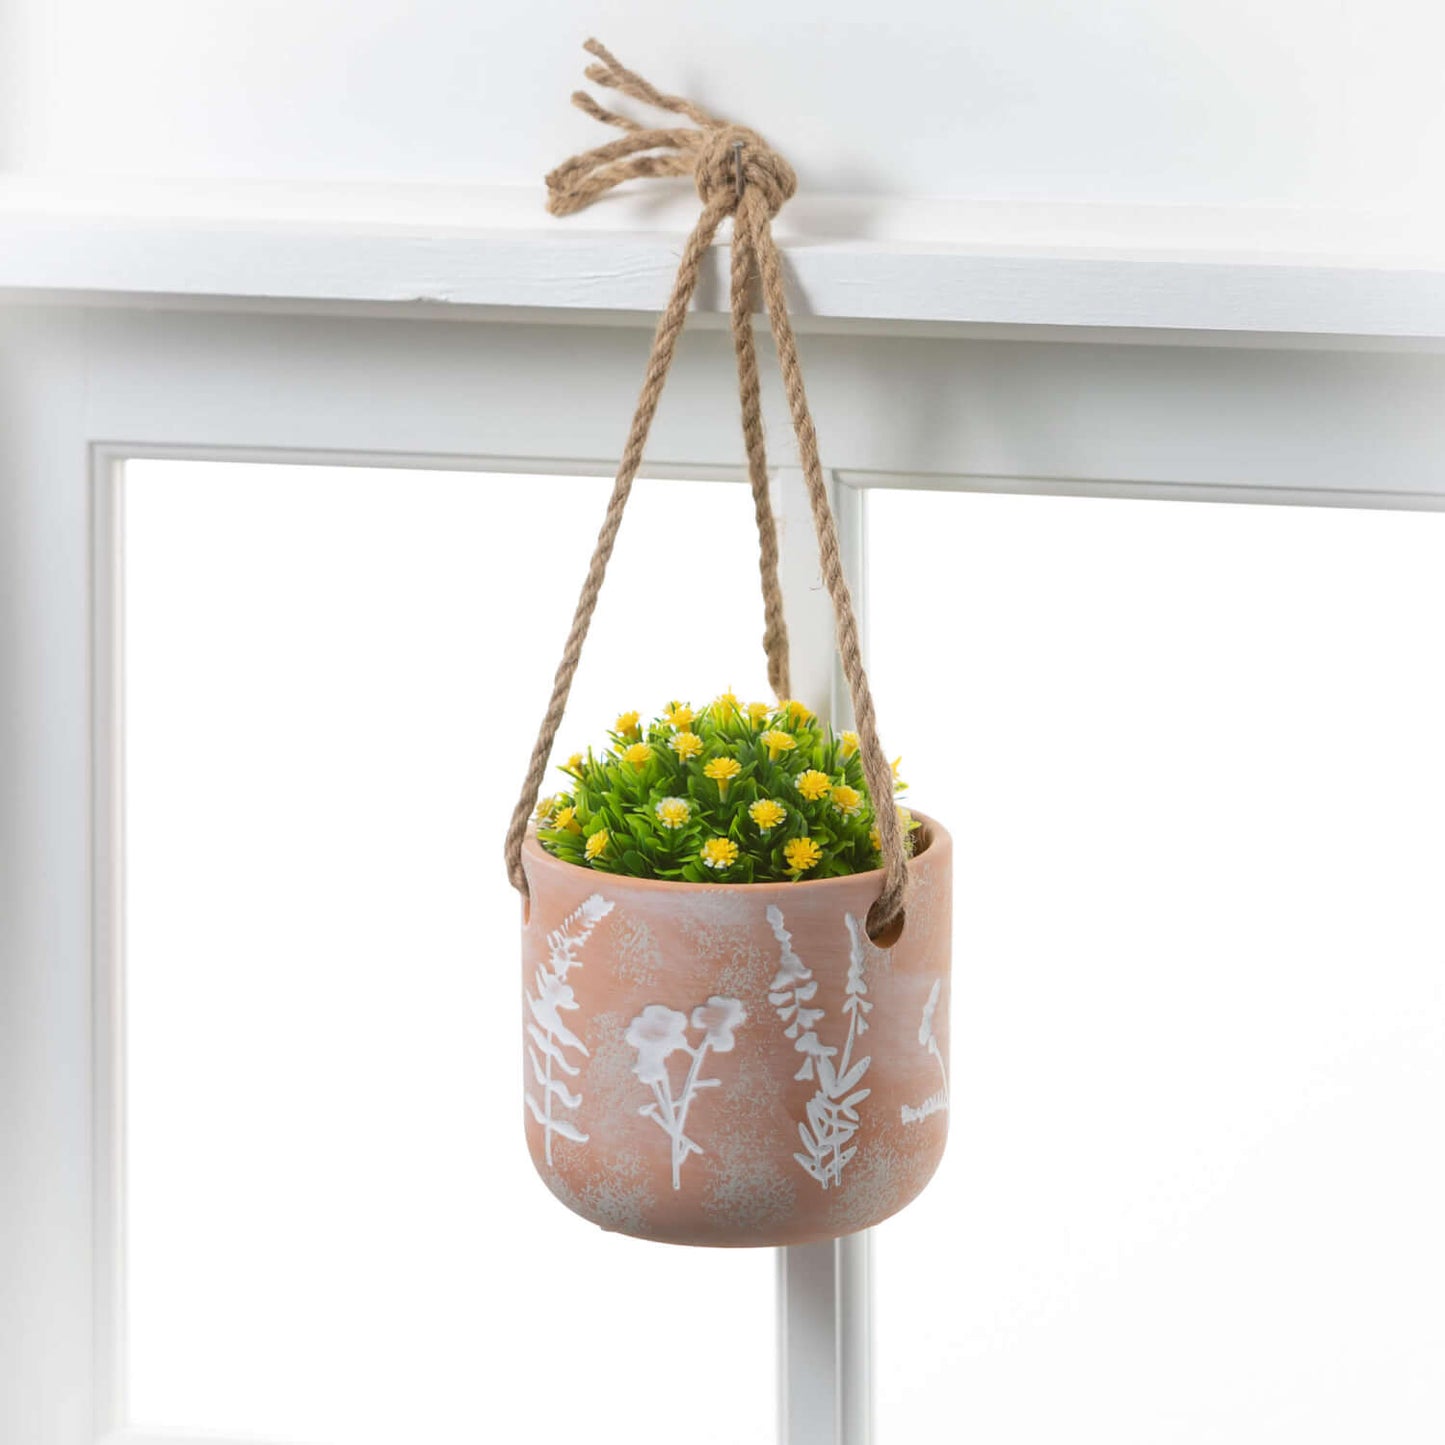 pot filled with small yellow flowers hanging in a window.